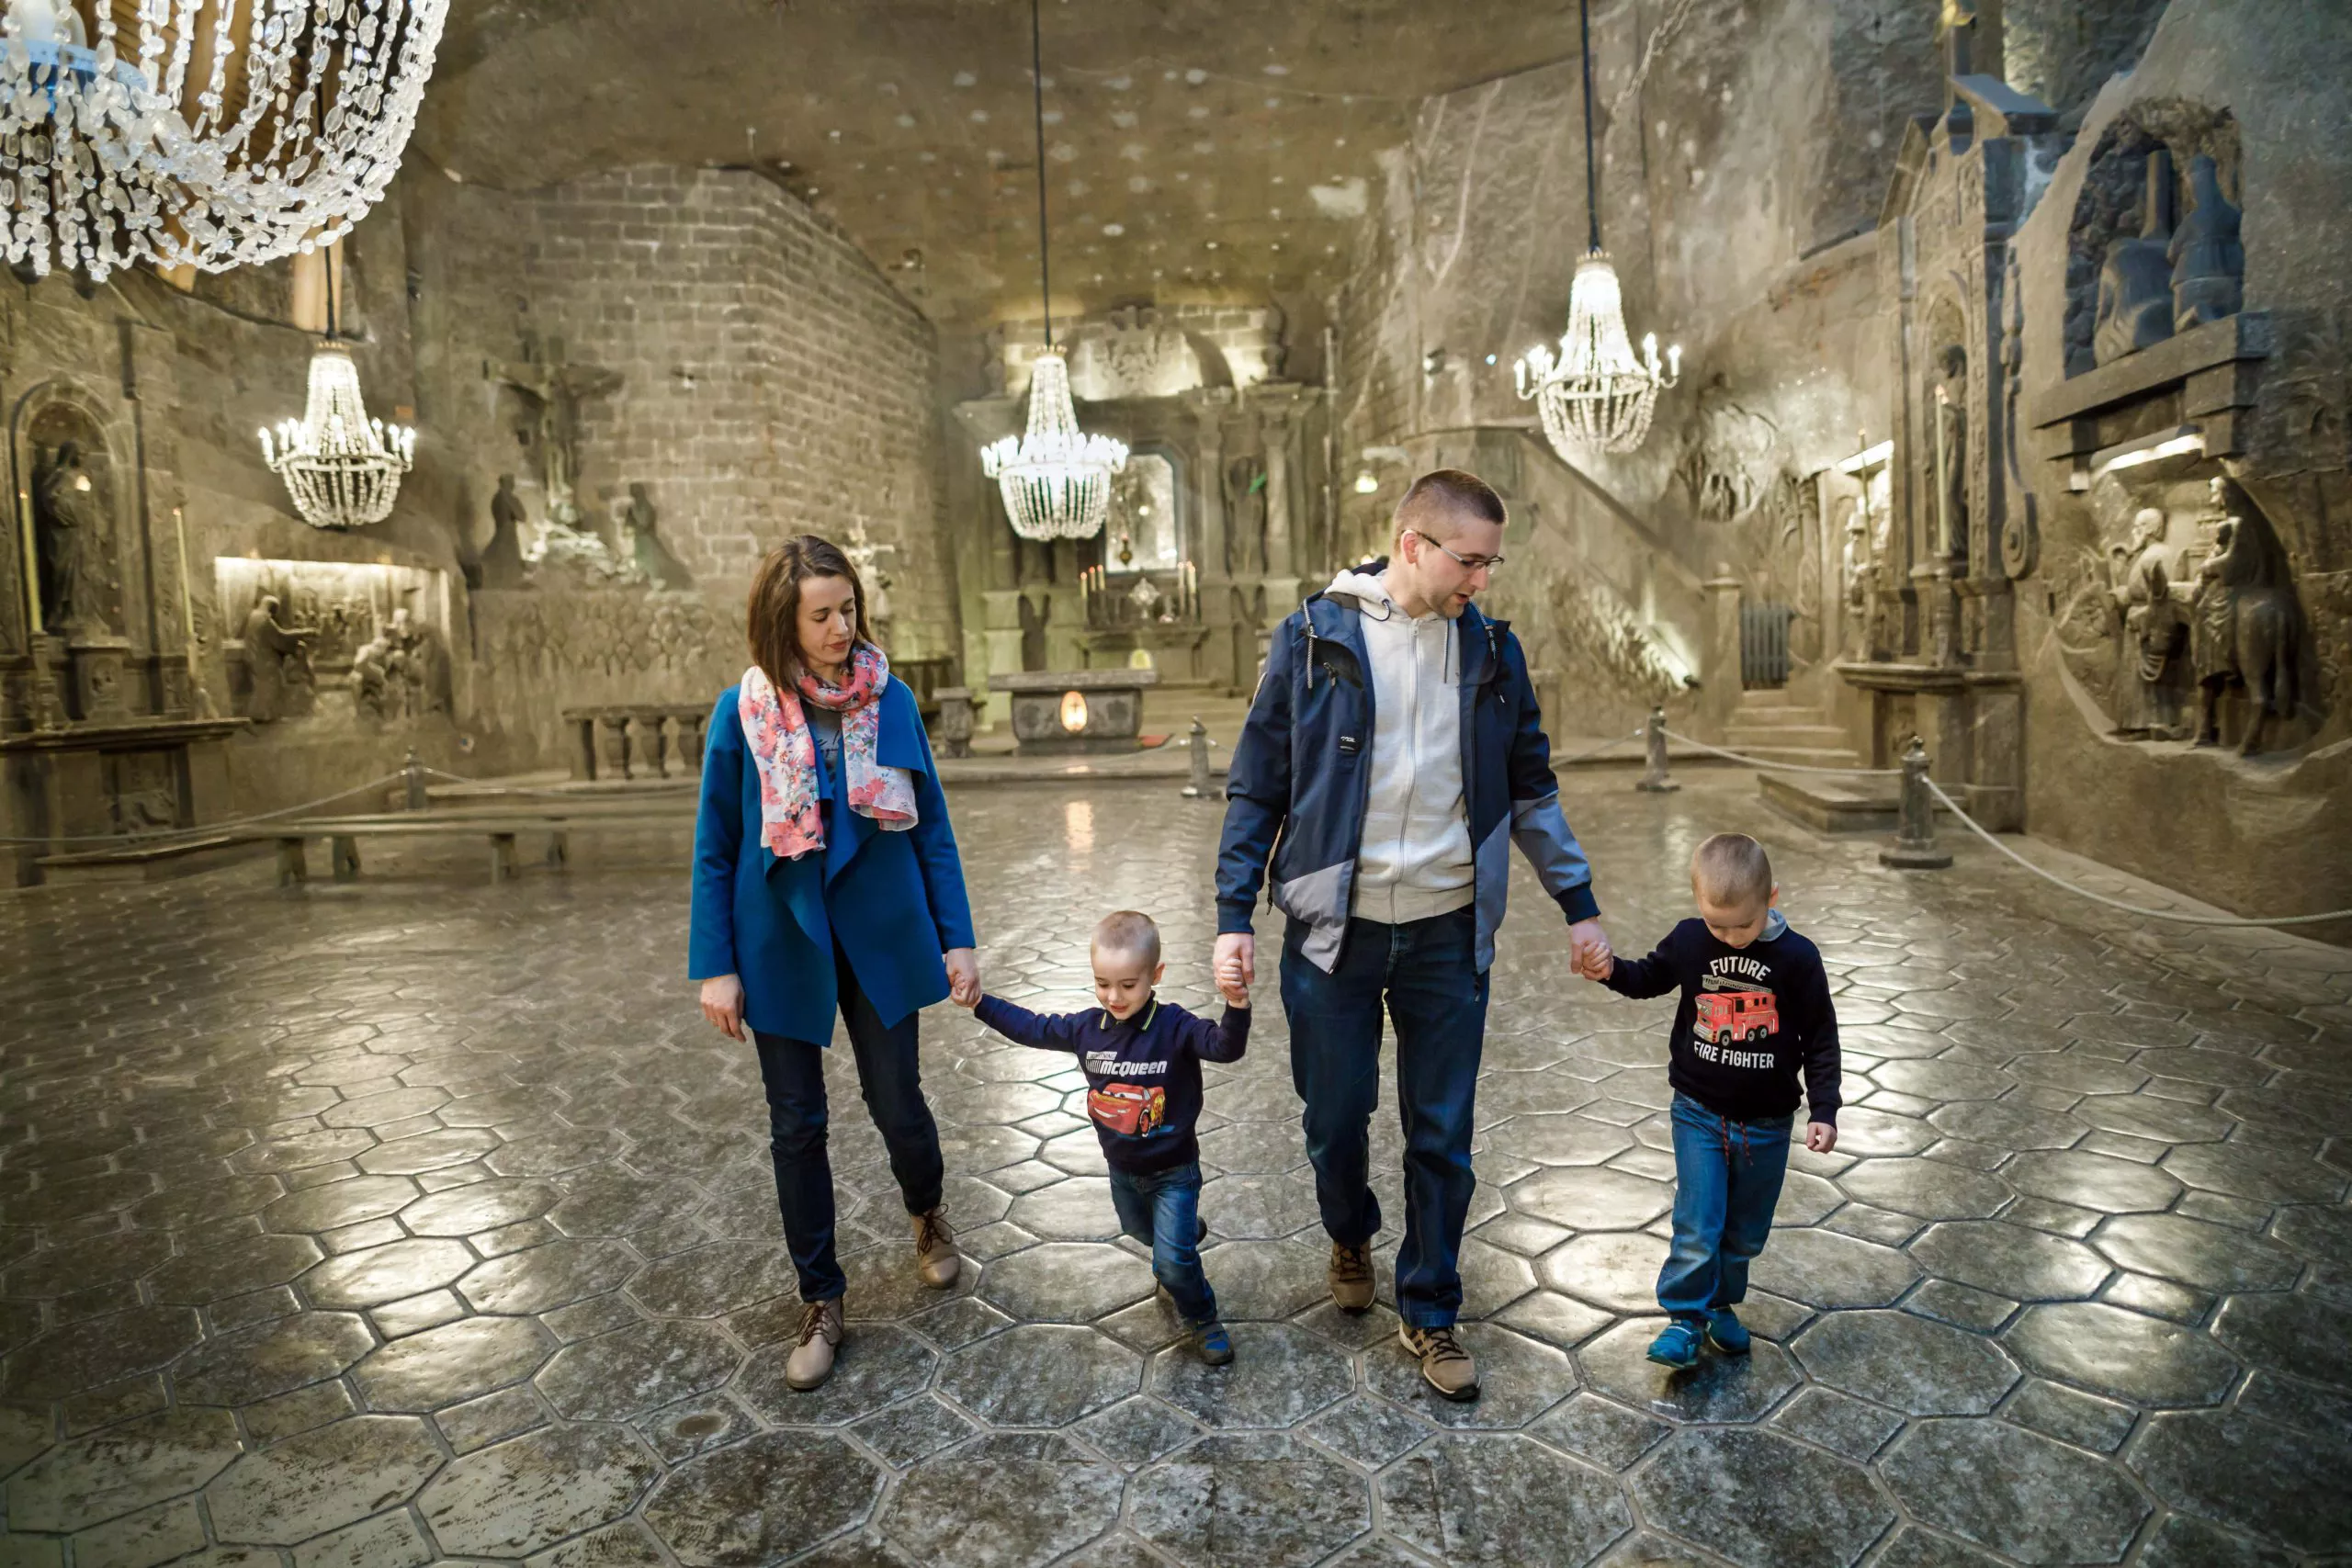 A young family dressed in blue: a woman with a white scarf, a very small boy, a man in a white shirt, and another little boy – all holding hands – walk towards the camera in a spacious underground salt chapel with walls and floor made of rock salt, numerous chandeliers made of salt crystals, and the walls adorned by bass reliefs of religious scenes cut in living salt.